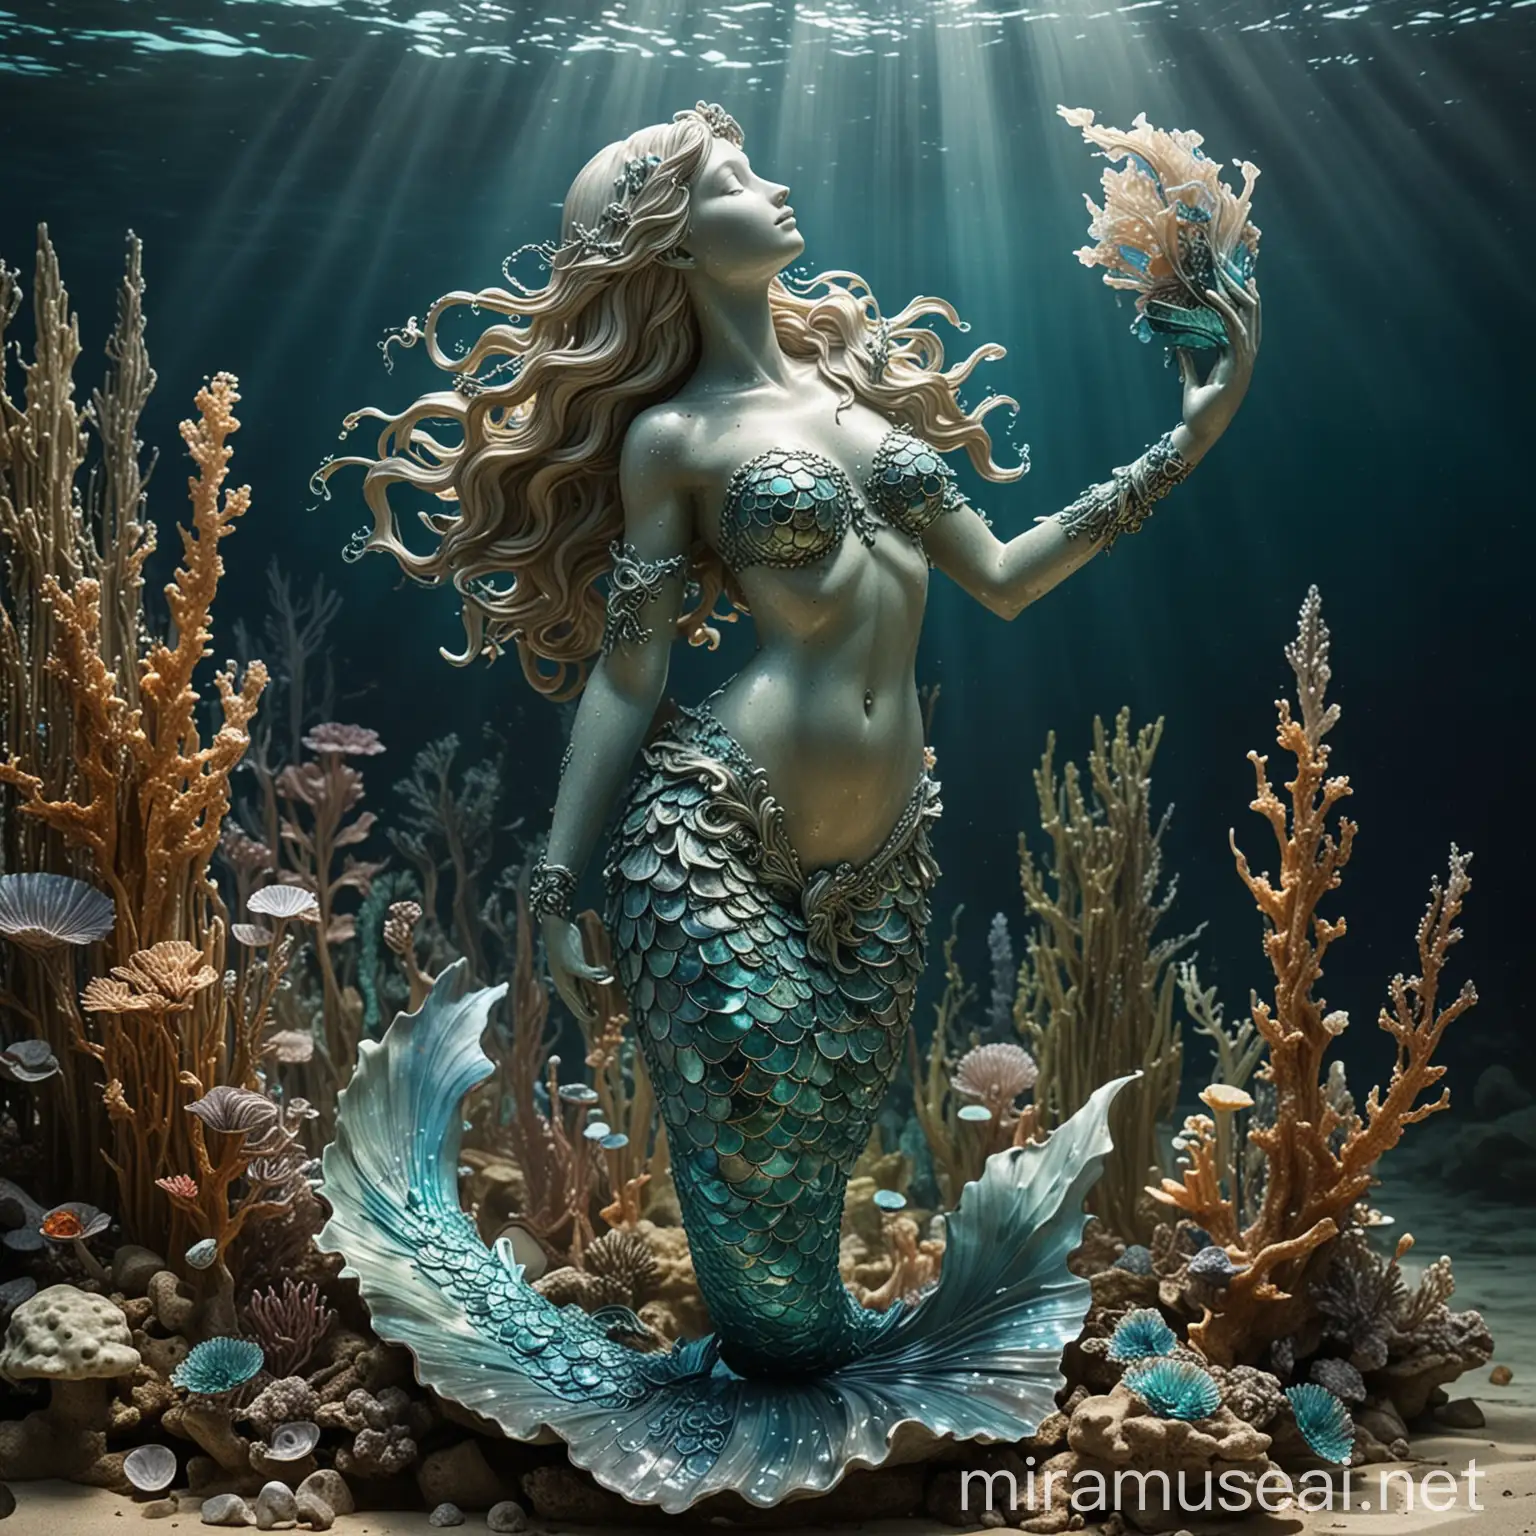 At the heart of the ocean's depths, nestled among vibrant coral formations and swaying sea plants, stands a majestic statue of a mermaid. Carved from iridescent abalone and other marine materials, the statue exudes an ethereal beauty that captivates all who behold it. The mermaid's graceful form is frozen in time, her tail shimmering with hues of azure and emerald, reminiscent of the ocean's depths.

With outstretched arms and a serene expression, the mermaid seems to beckon to all who venture near, her eyes sparkling with an otherworldly wisdom. The intricate details of her scales and flowing hair are a testament to the skill of the artisan who crafted her, each delicate feature a tribute to the wonders of the sea.

As sunlight filters down from the surface above, casting dappled rays of light upon the ocean floor, the statue seems to come alive with a mesmerizing glow. It is a timeless tribute to the enchanting beauty of the underwater world, a silent guardian of the secrets that lie beneath the waves.

